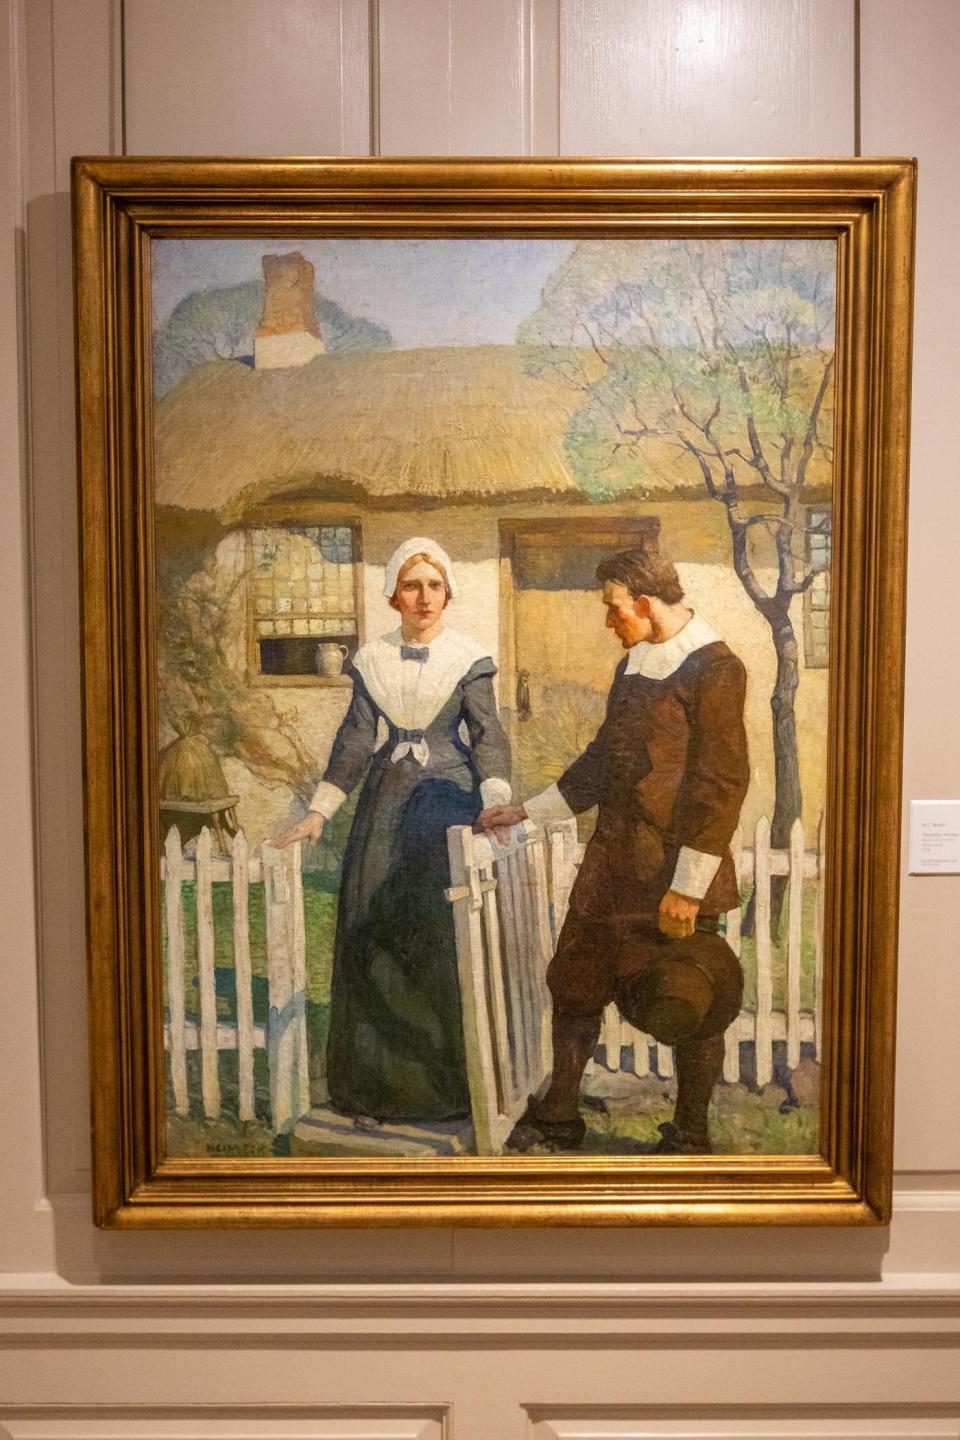 N.C. Wyeth's 'Good-Bye, Mistress Friendly-Soul!' is among the works on display as part of the 'Figurative Masters of the Americas' exhibition at the Ann Norton Sculpture Gardens through Feb. 12.